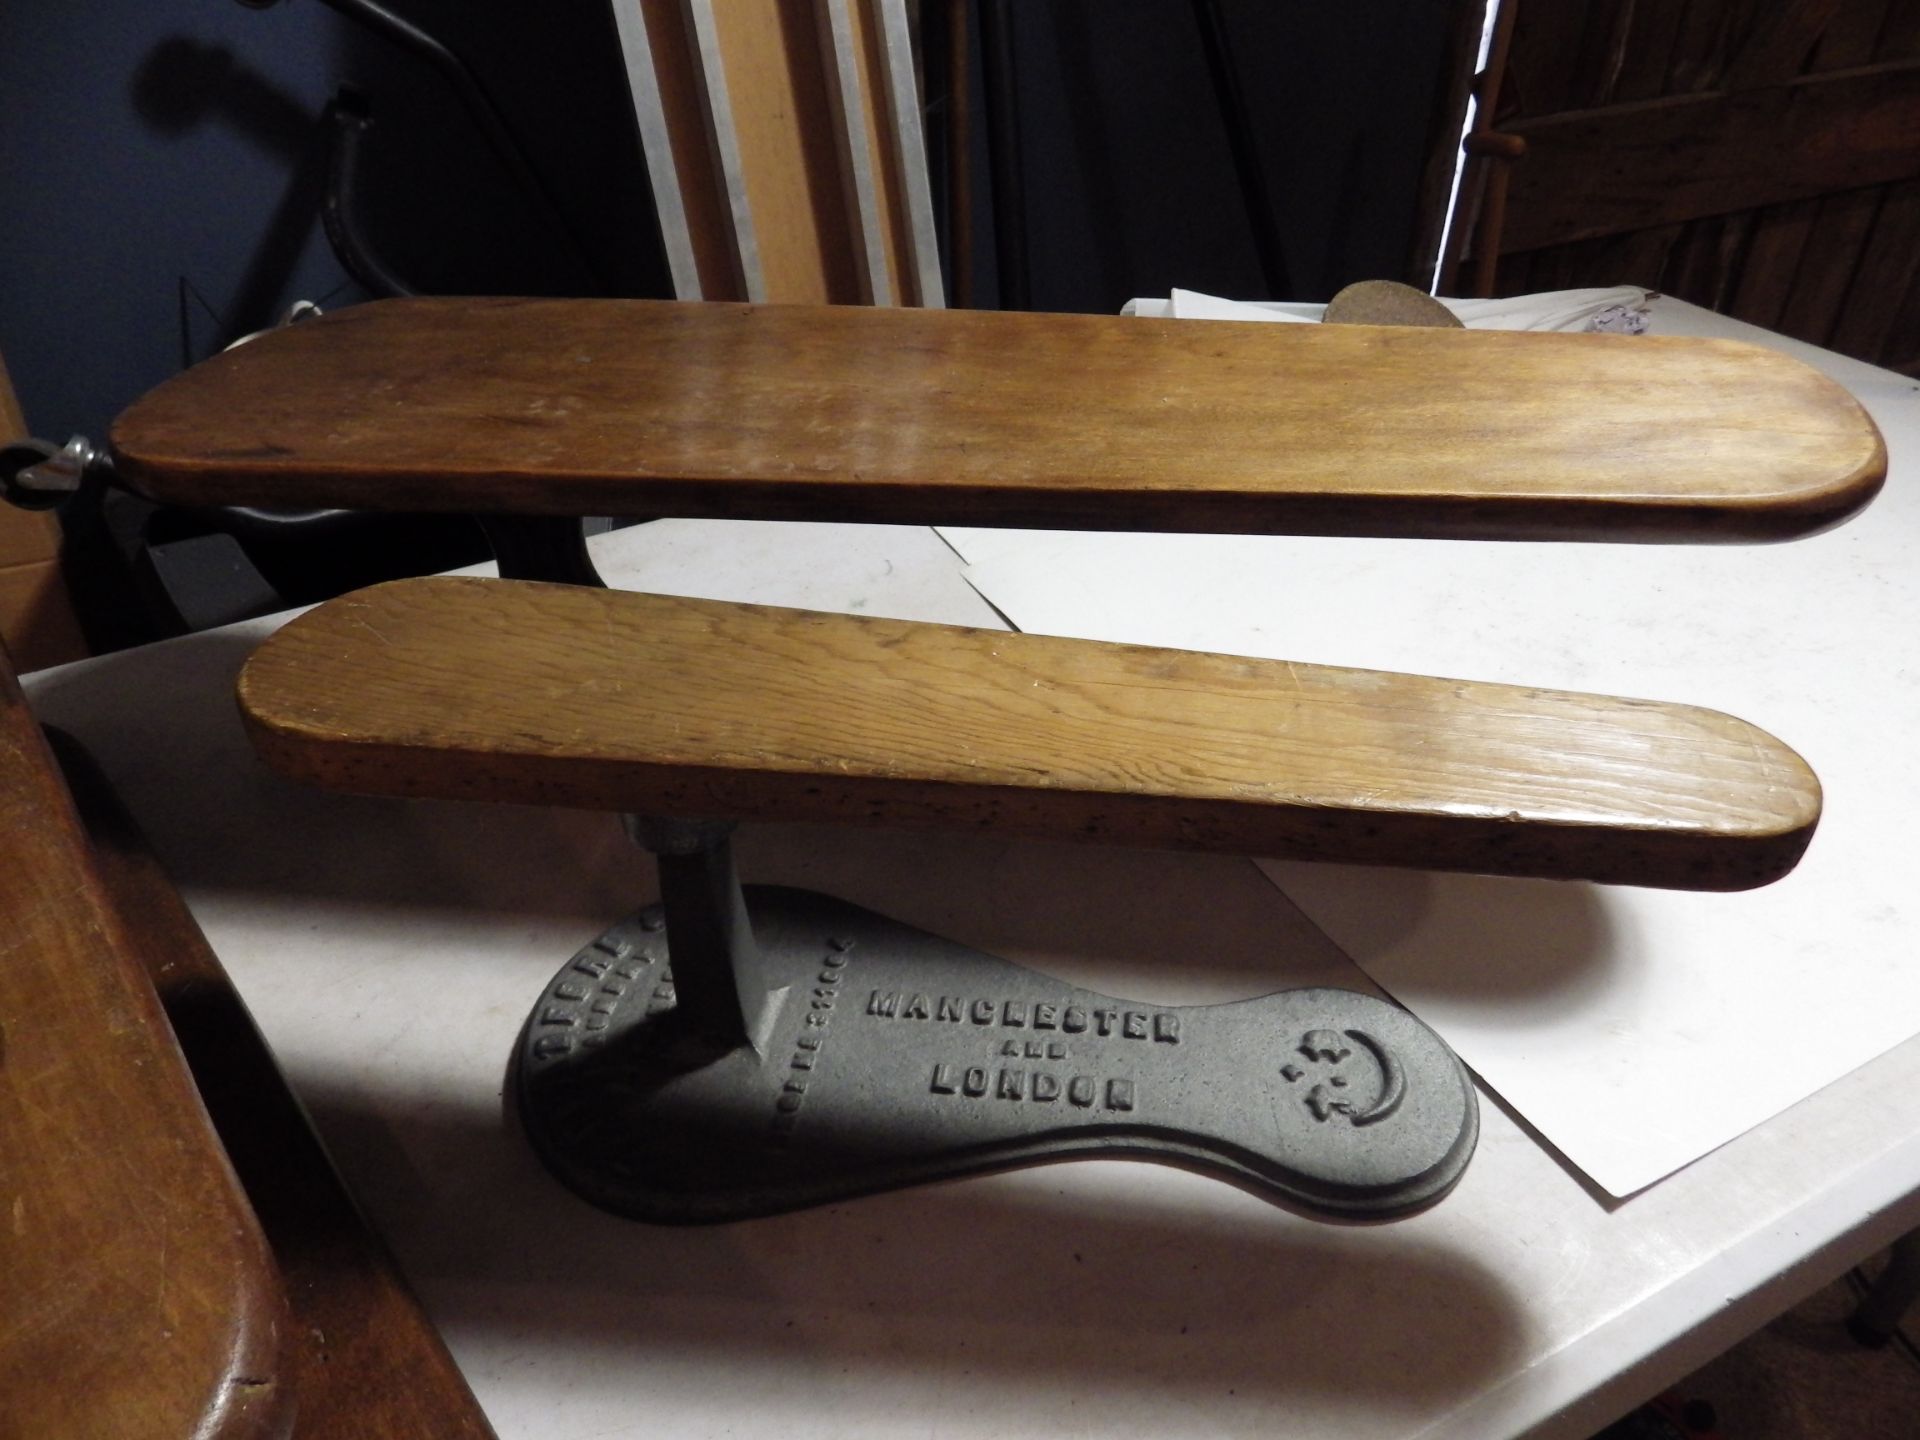 3 sleeve ironing boards - 2 wood sleeves measuring approx 78cm and 67cm plus T Bradford & Son - Image 3 of 4